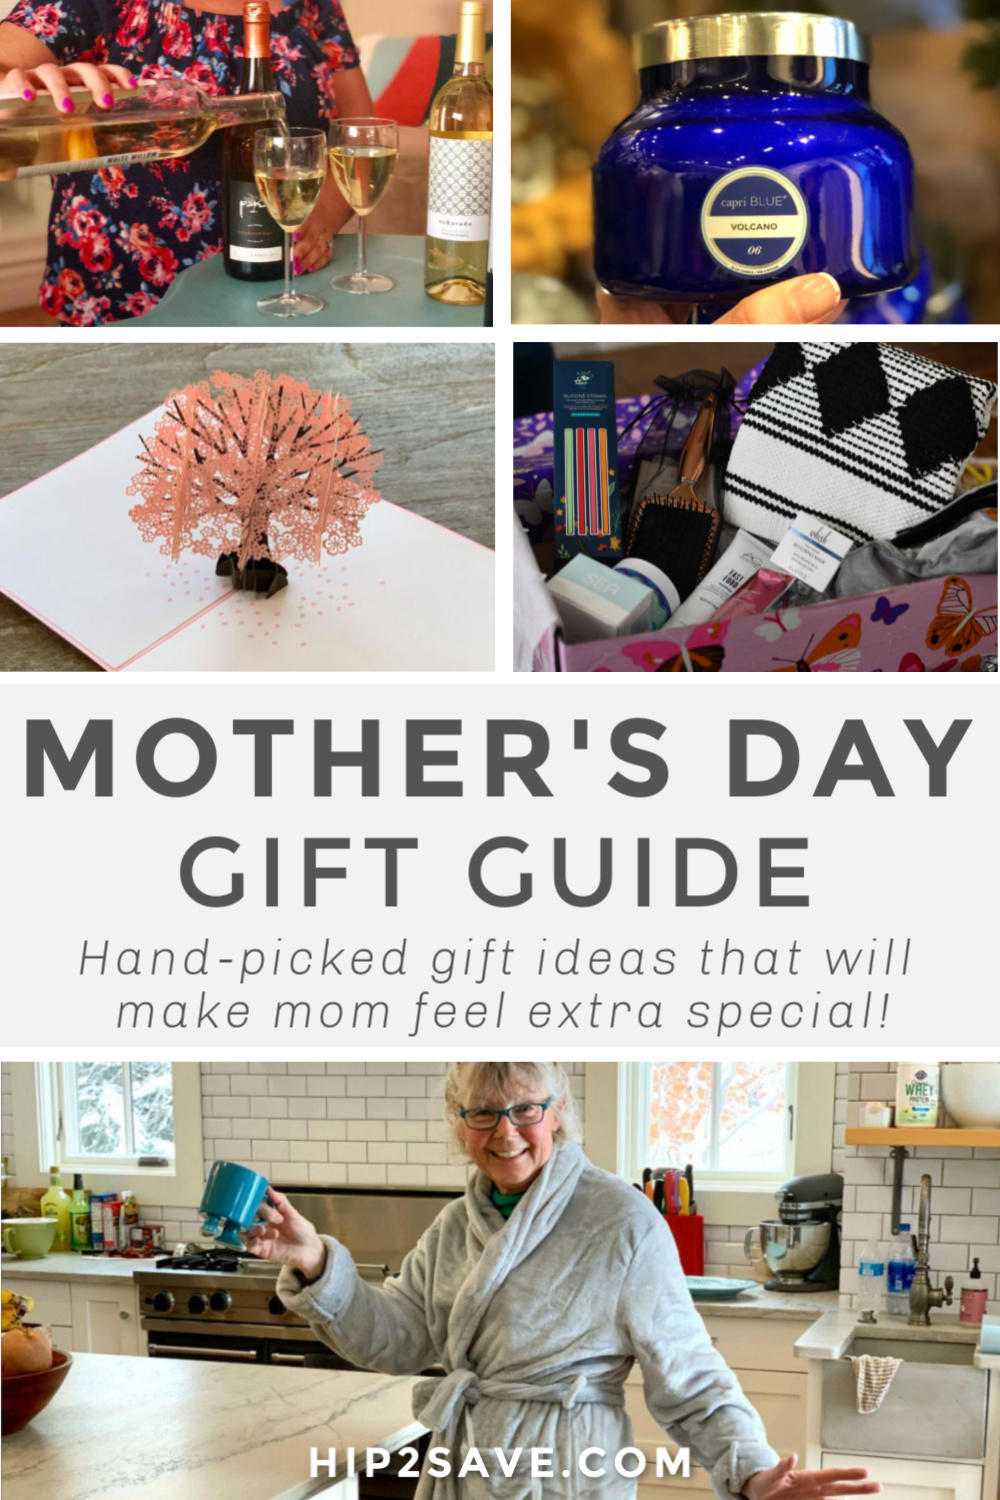 The Best Gifts for Mom | Shop Our Gift Guide - Hip2Save